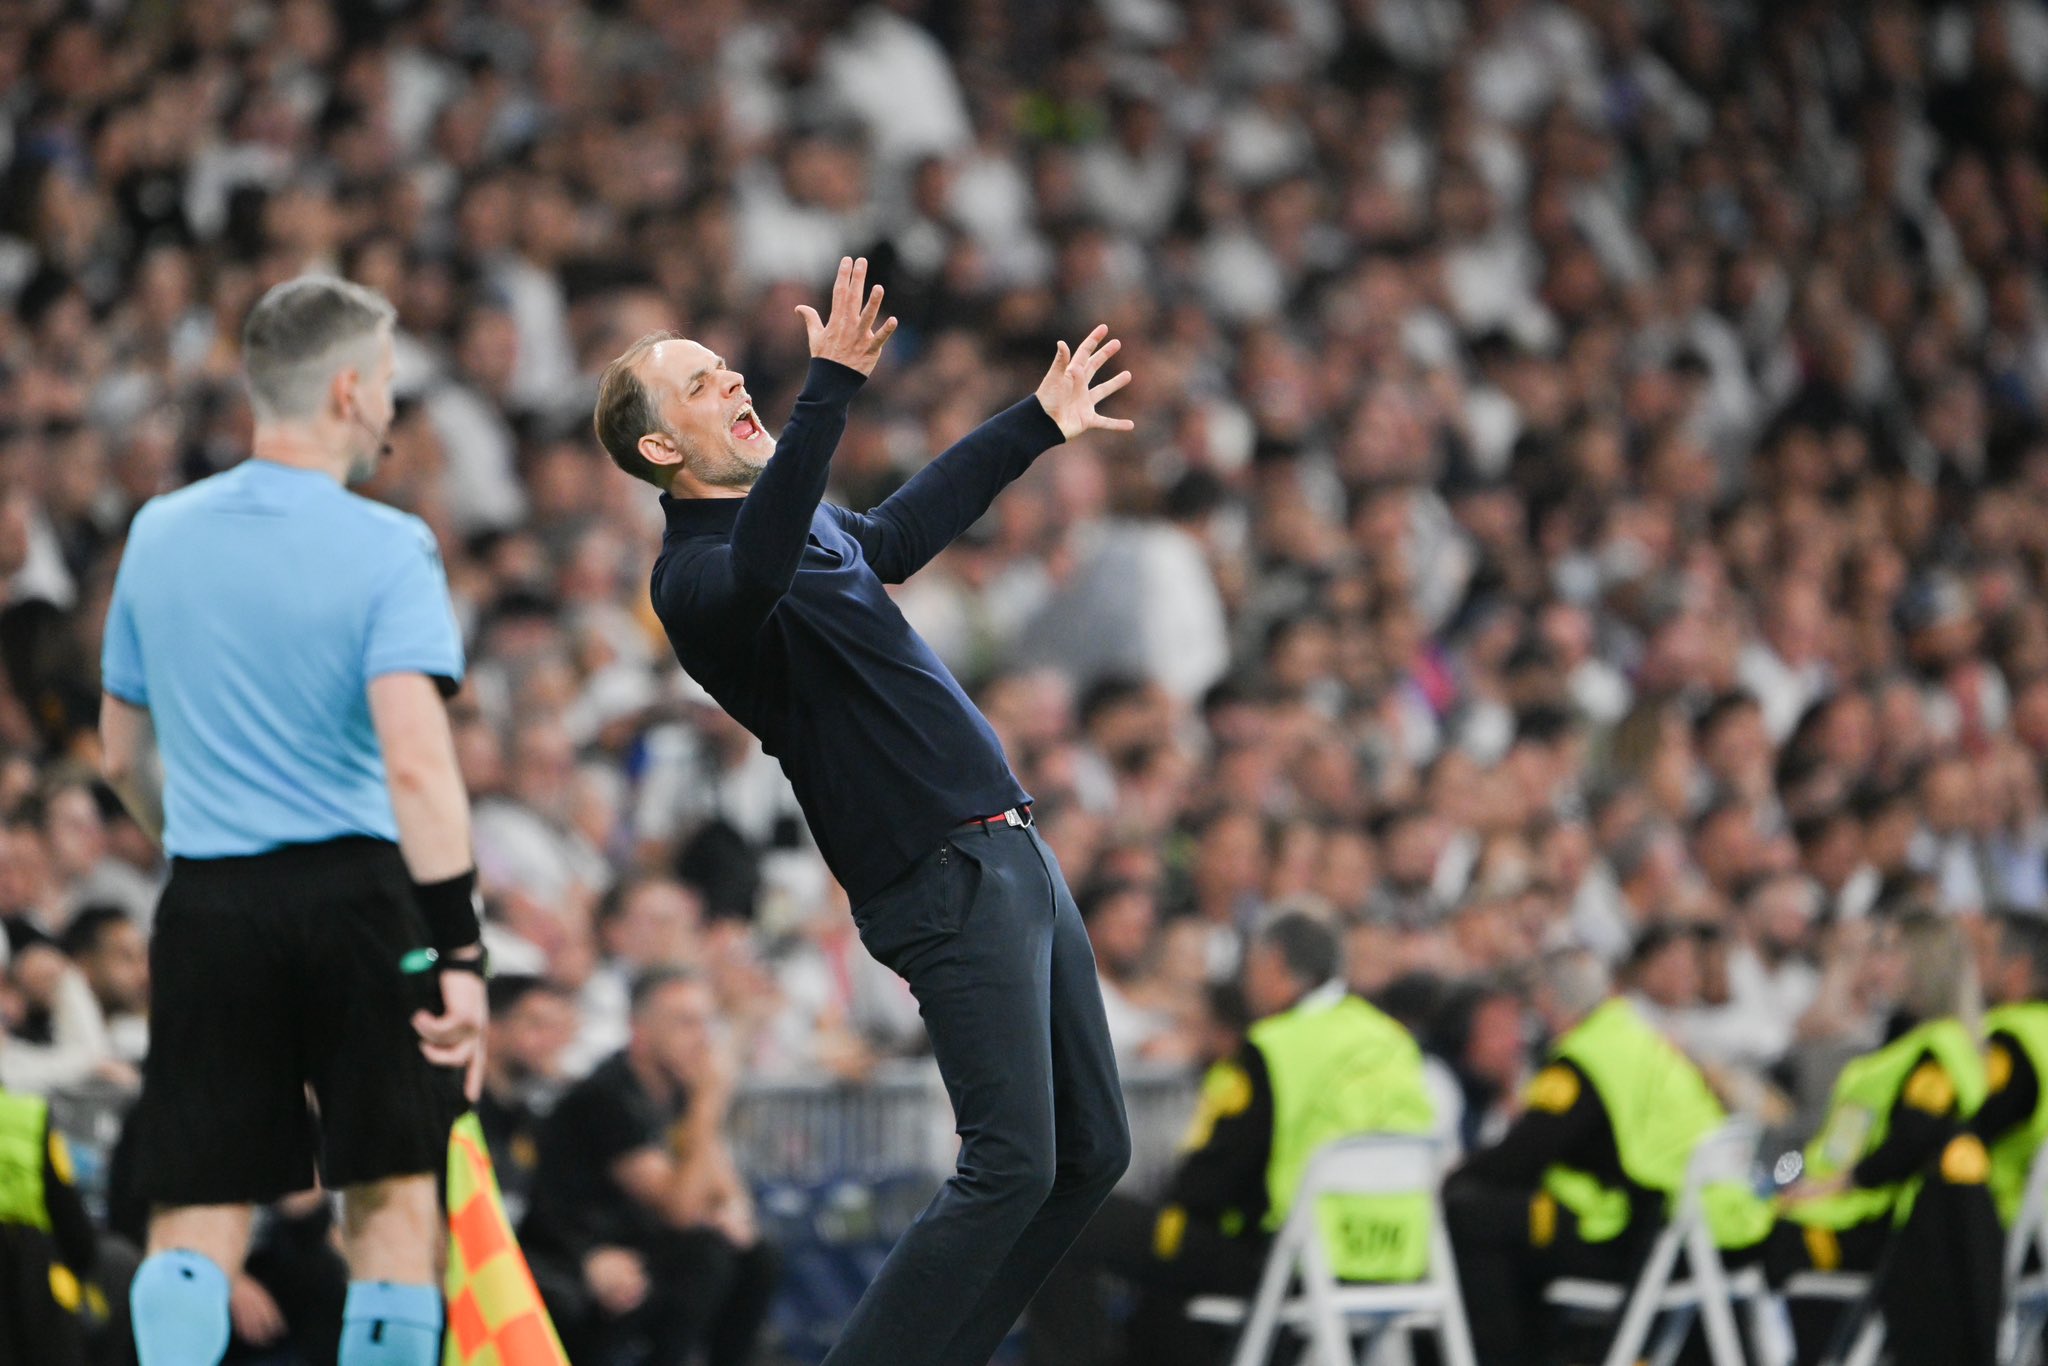 Thomas Tuchel hints at Real Madrid influence on referee team after controversial moment in semi-final